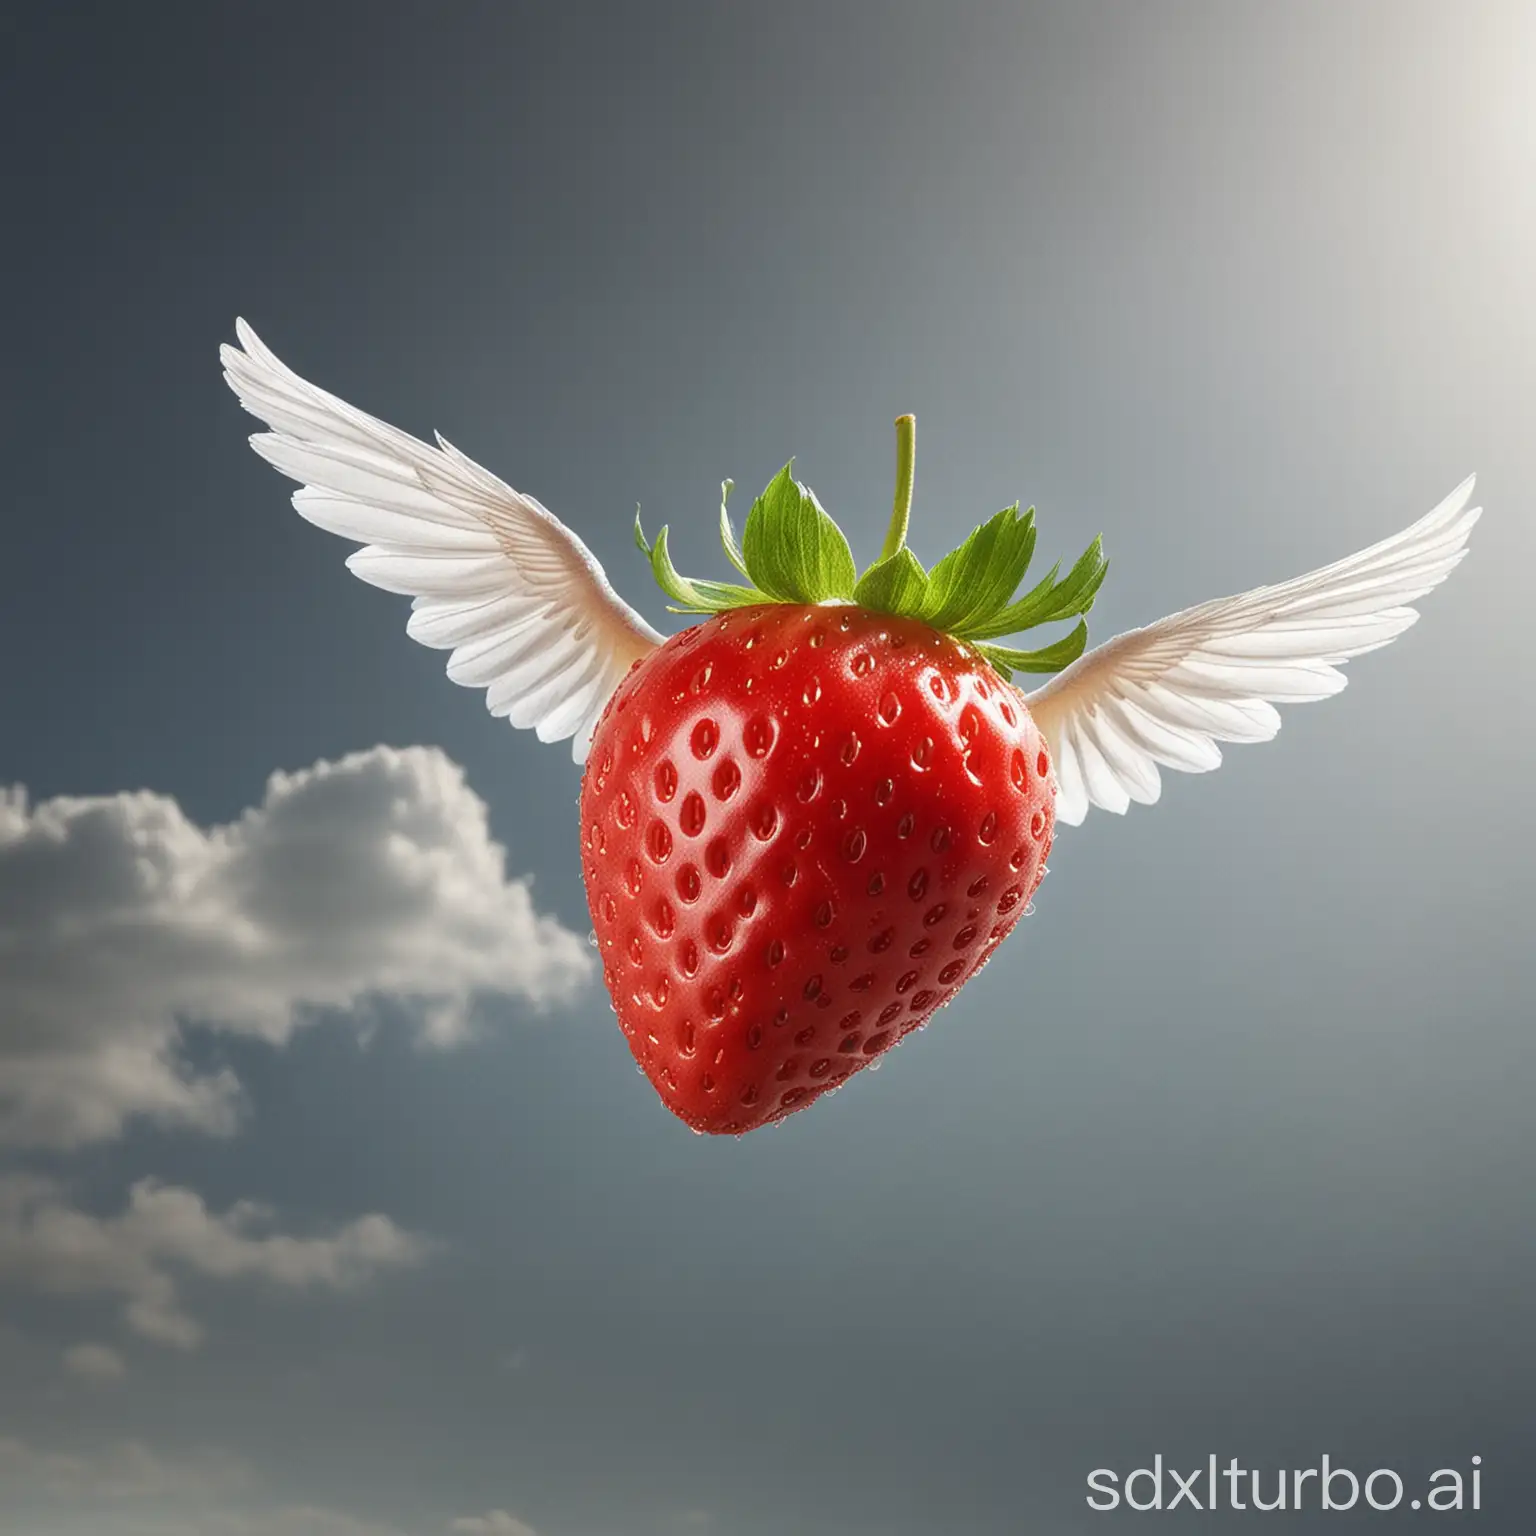 Adorable-Flying-Strawberry-Descends-with-Eager-Anticipation